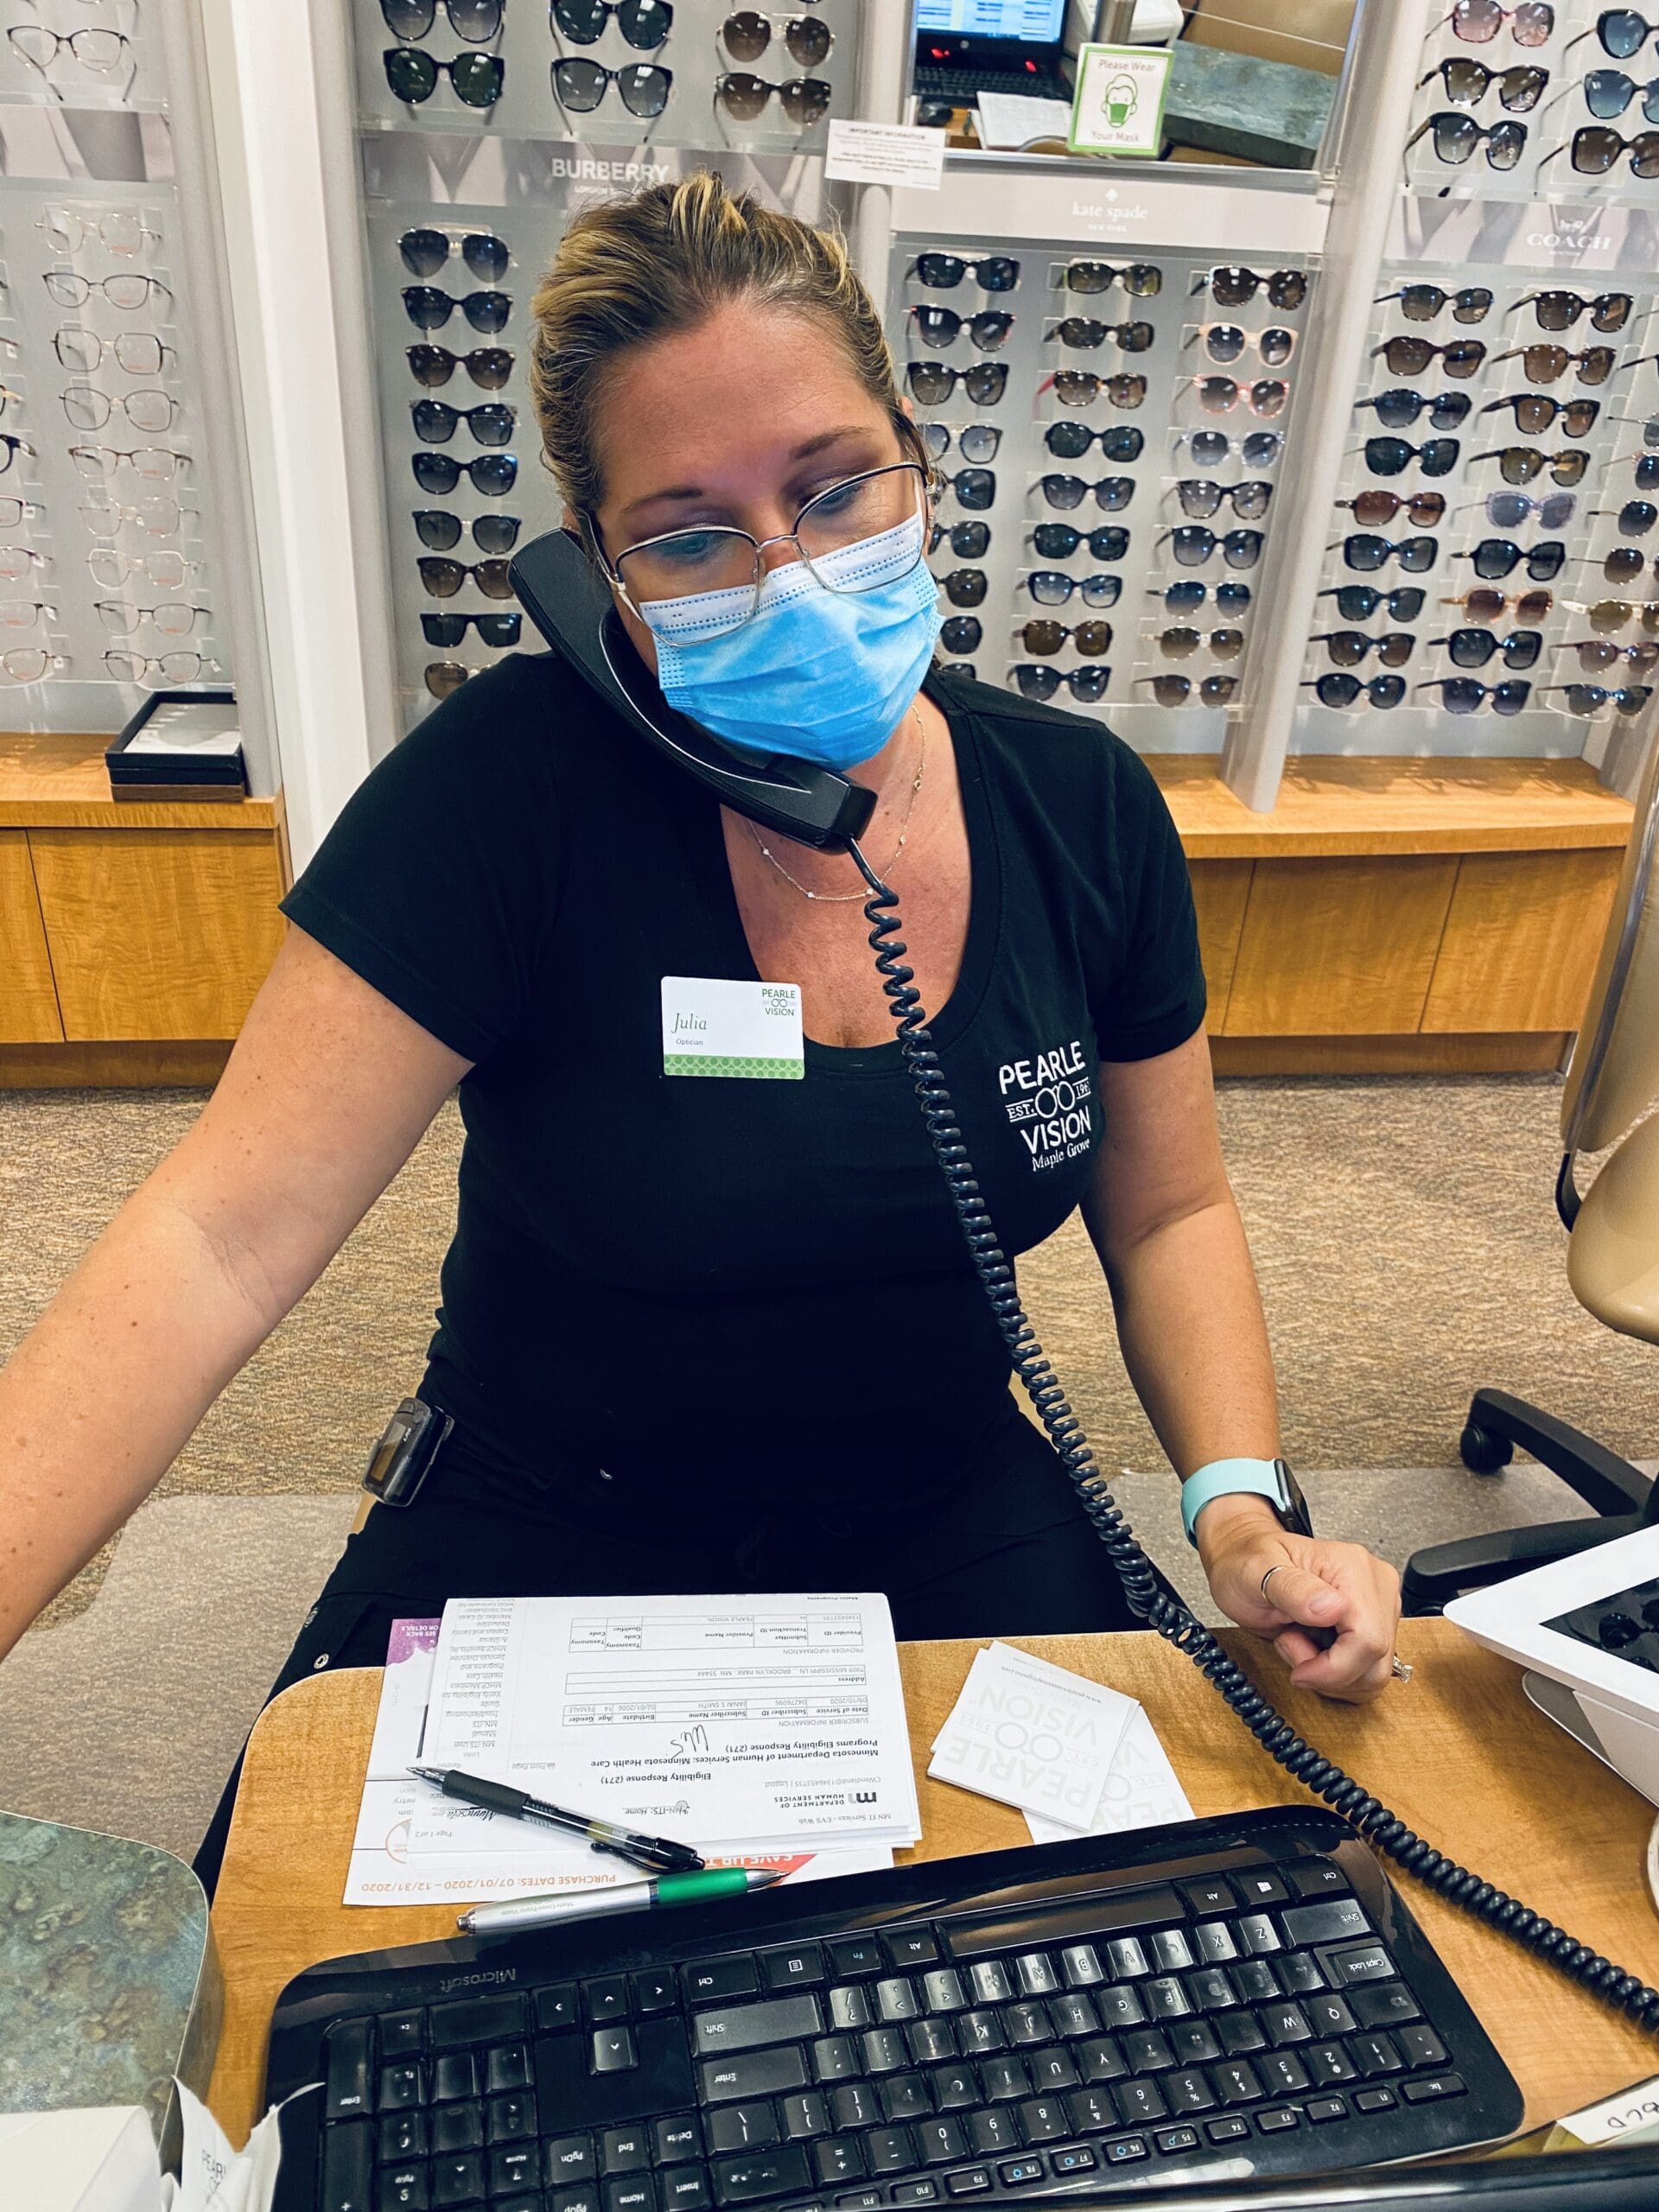 Julia wearing a Covid mask with her glasses Maple Grove Eye Doctors at Pearle Vision